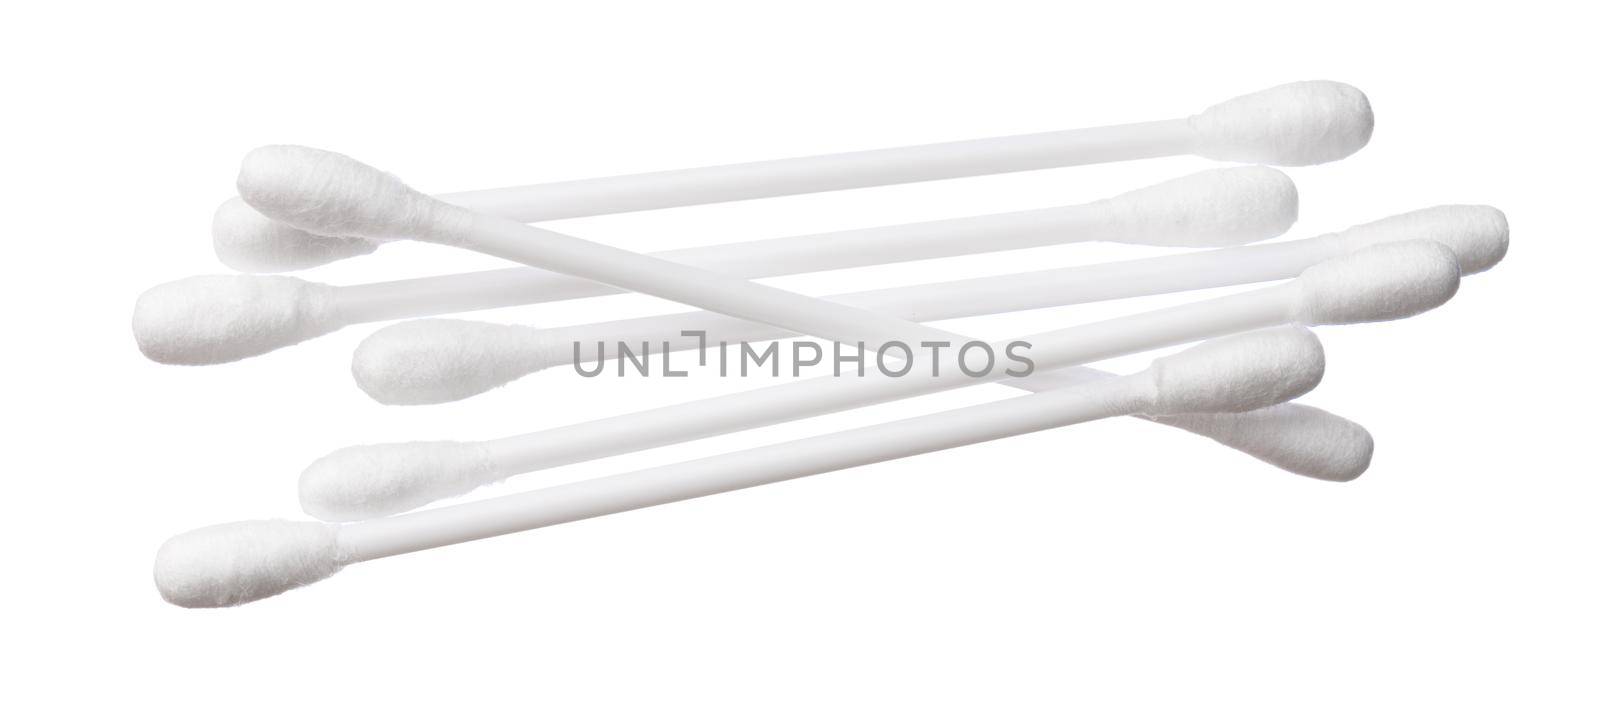 Cotton cleaning swabs isolated on white background close up